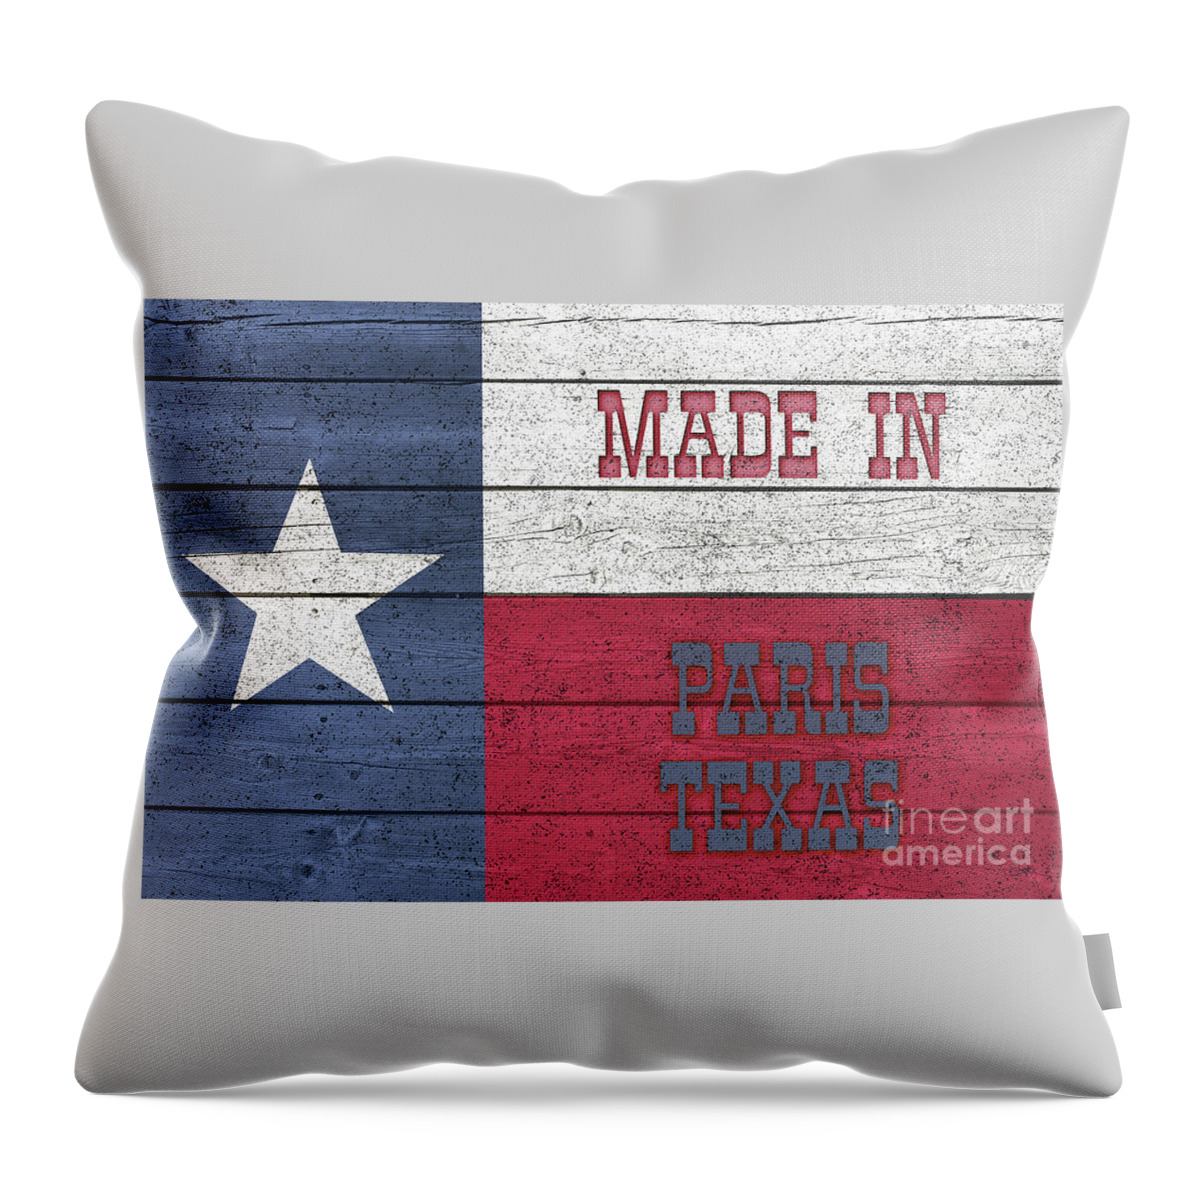 Made In Paris Texas Throw Pillow featuring the digital art Made In Paris Texas by Imagery by Charly